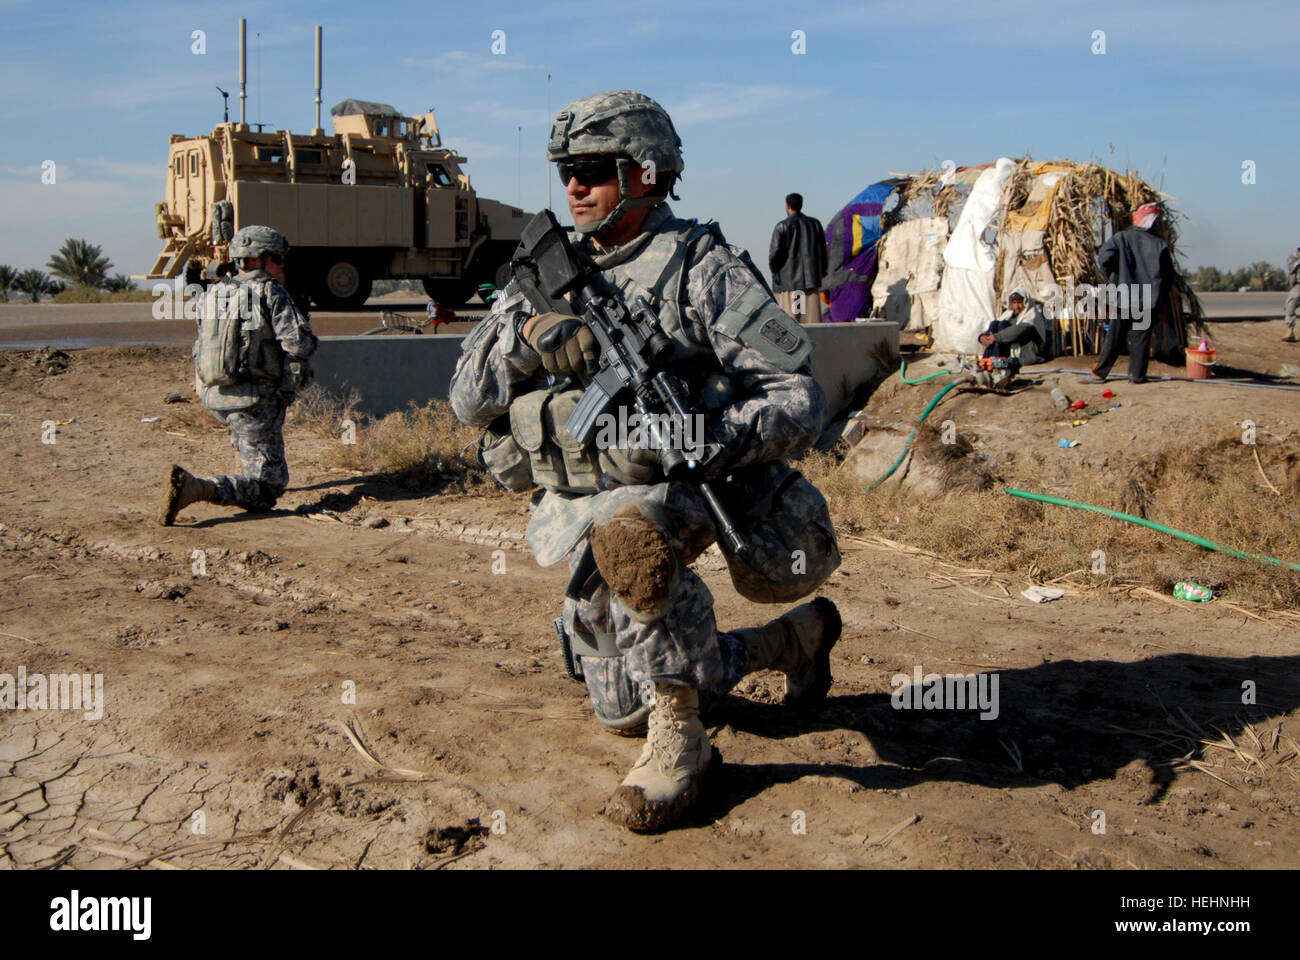 U.S. Army Cpl. Oscar Tovar from Headquarters and Headquarters Company, Charlie Company, 1st Battalion, 2nd Infantry Regiment, 172 Infantry Brigade takes a knee while sweeping Main Supply Route Tampa for improvised explosive devices as part of an un-mounted route clearance, outside of Forward Operating Base Kalsu, Iraq on Jan 3, 2009. Flickr - The U.S. Army - www.Army.mil (64) Stock Photo